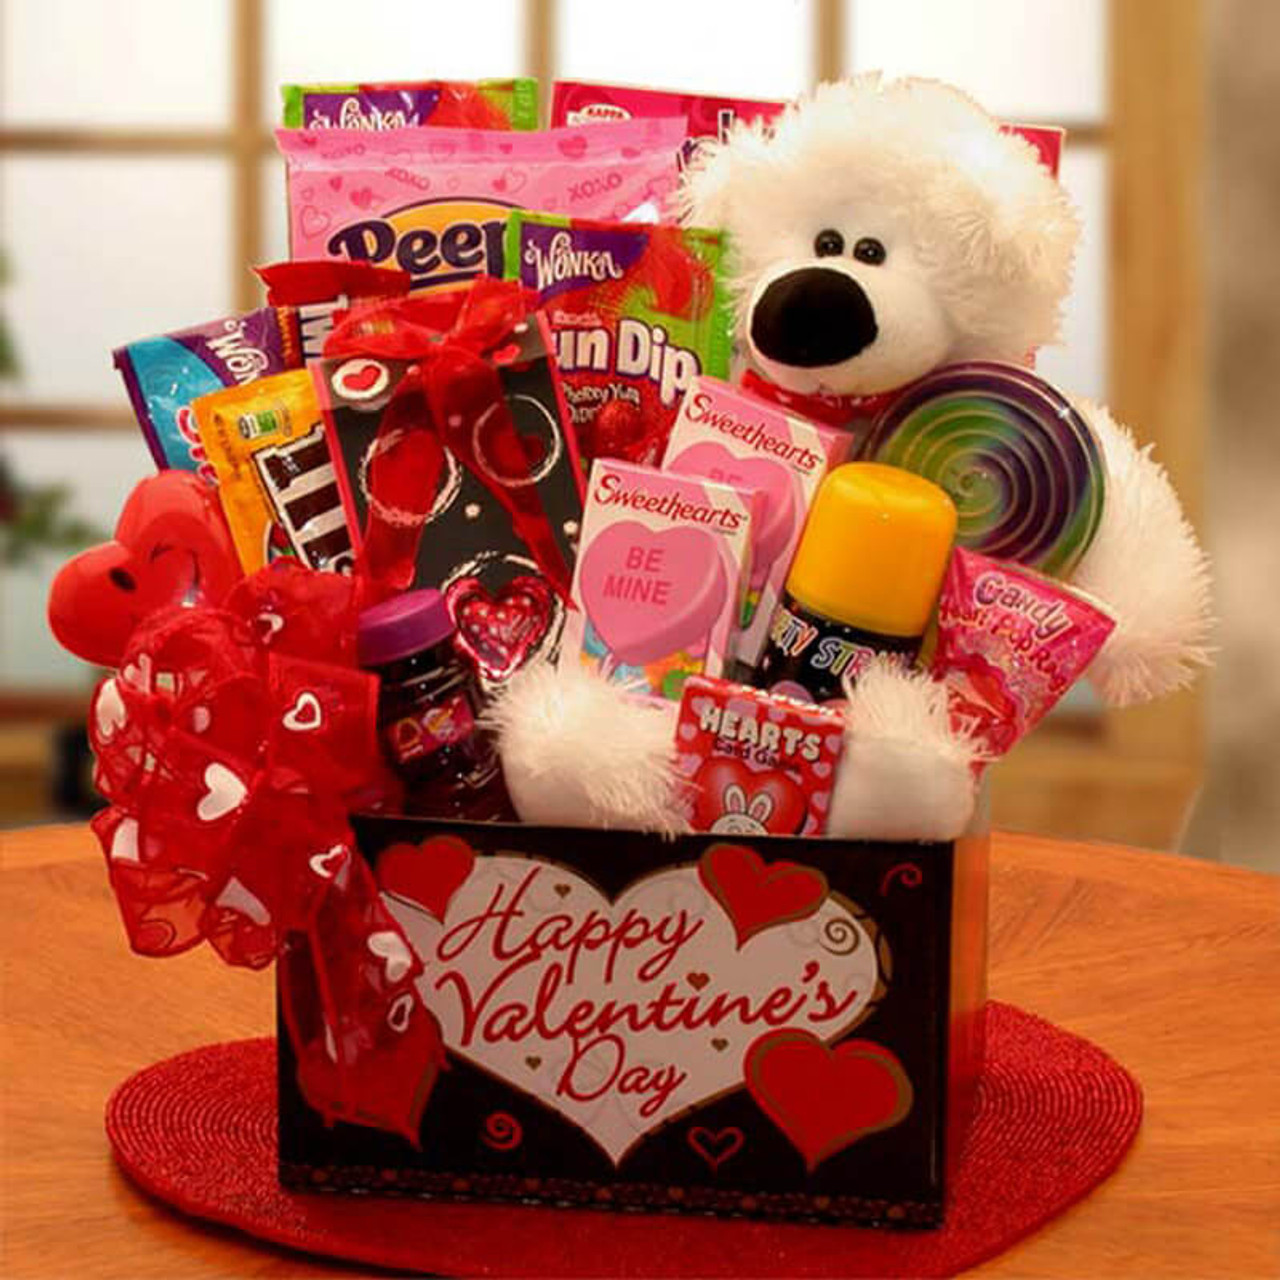 https://cdn11.bigcommerce.com/s-cz44ad1pu6/images/stencil/1280x1280/products/1474/4743/Youre-Beary-Huggable-Kids-Valentine-Gift-Box__83252.1641929365.jpg?c=2